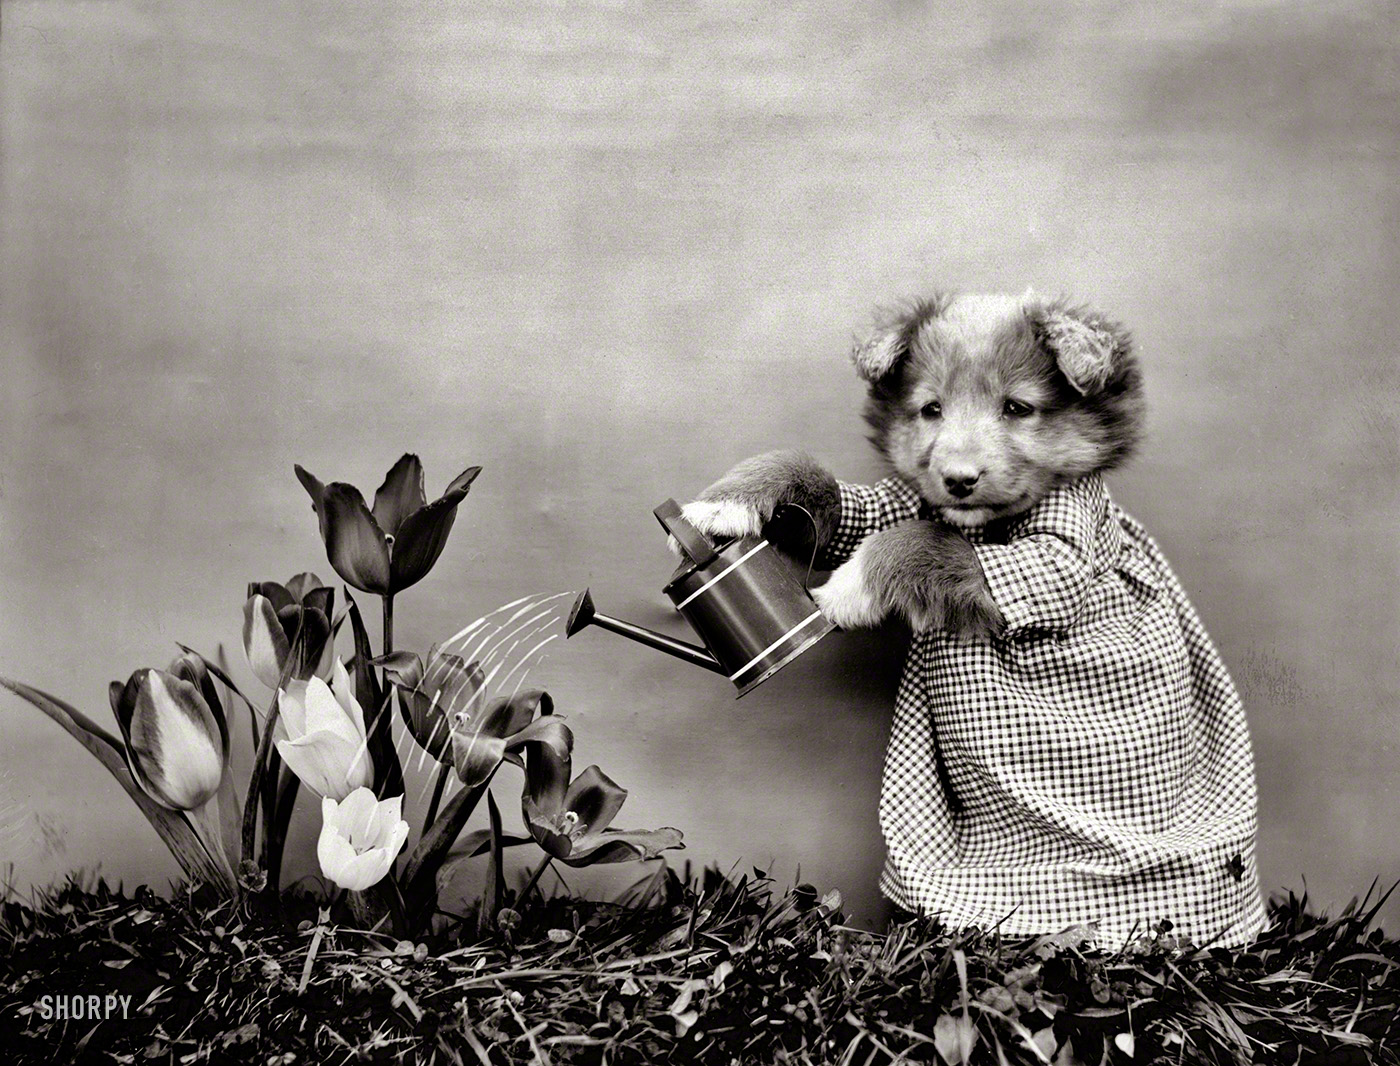 1914. "Dog watering flowers." Photo by Harry W. Frees. View full size.